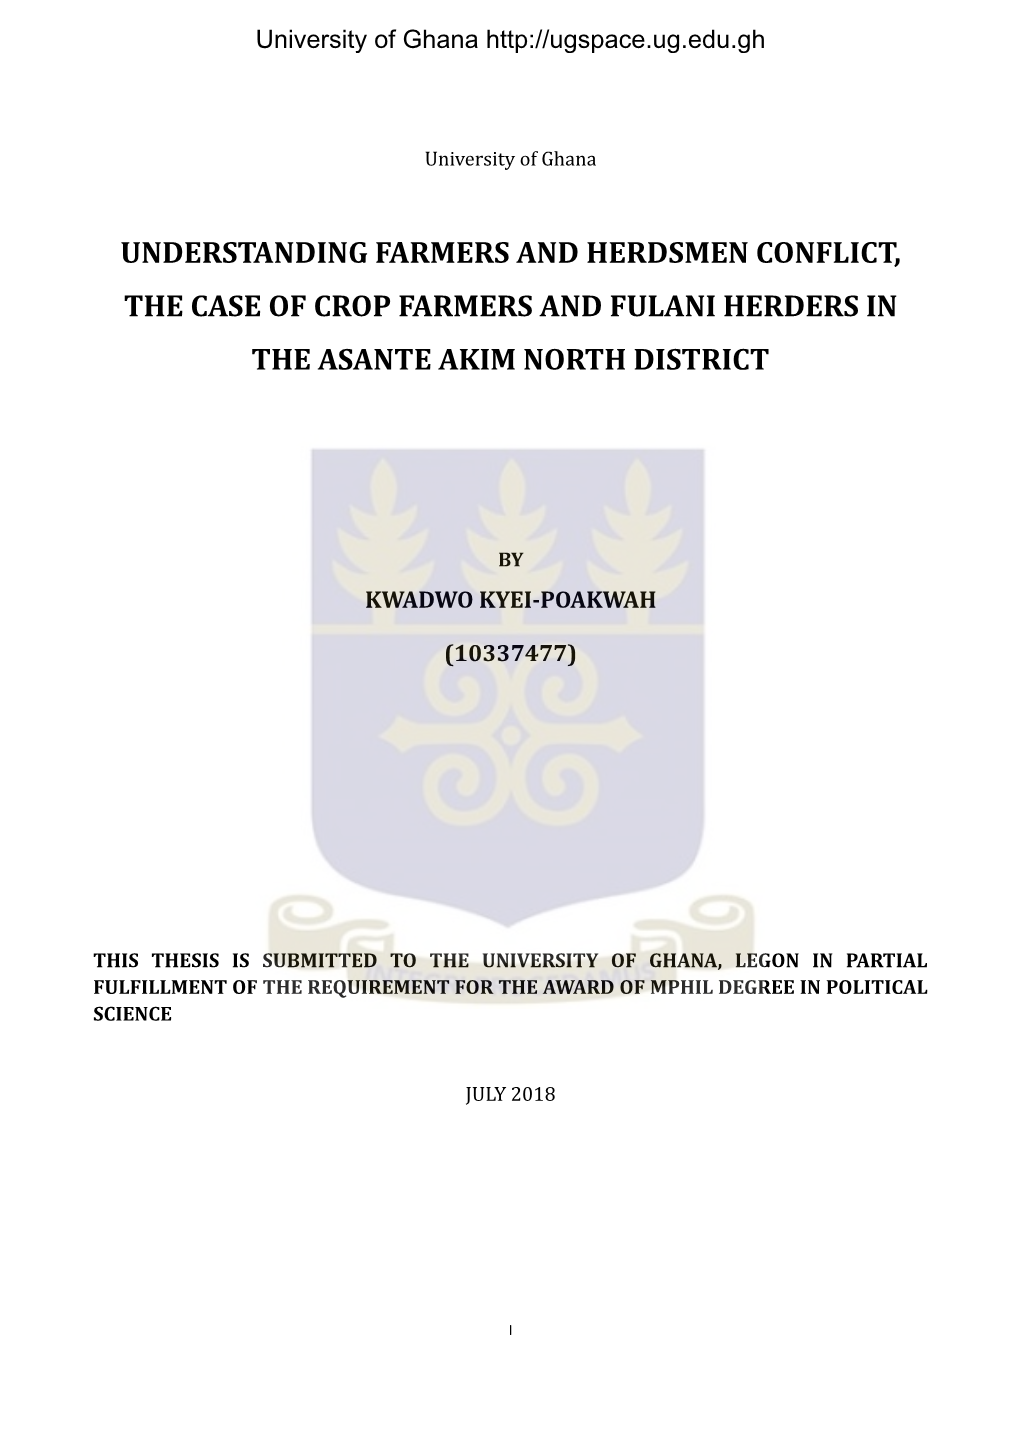 Understanding Farmers and Herdsmen Conflict, the Case of Crop Farmers and Fulani Herders in the Asante Akim North District